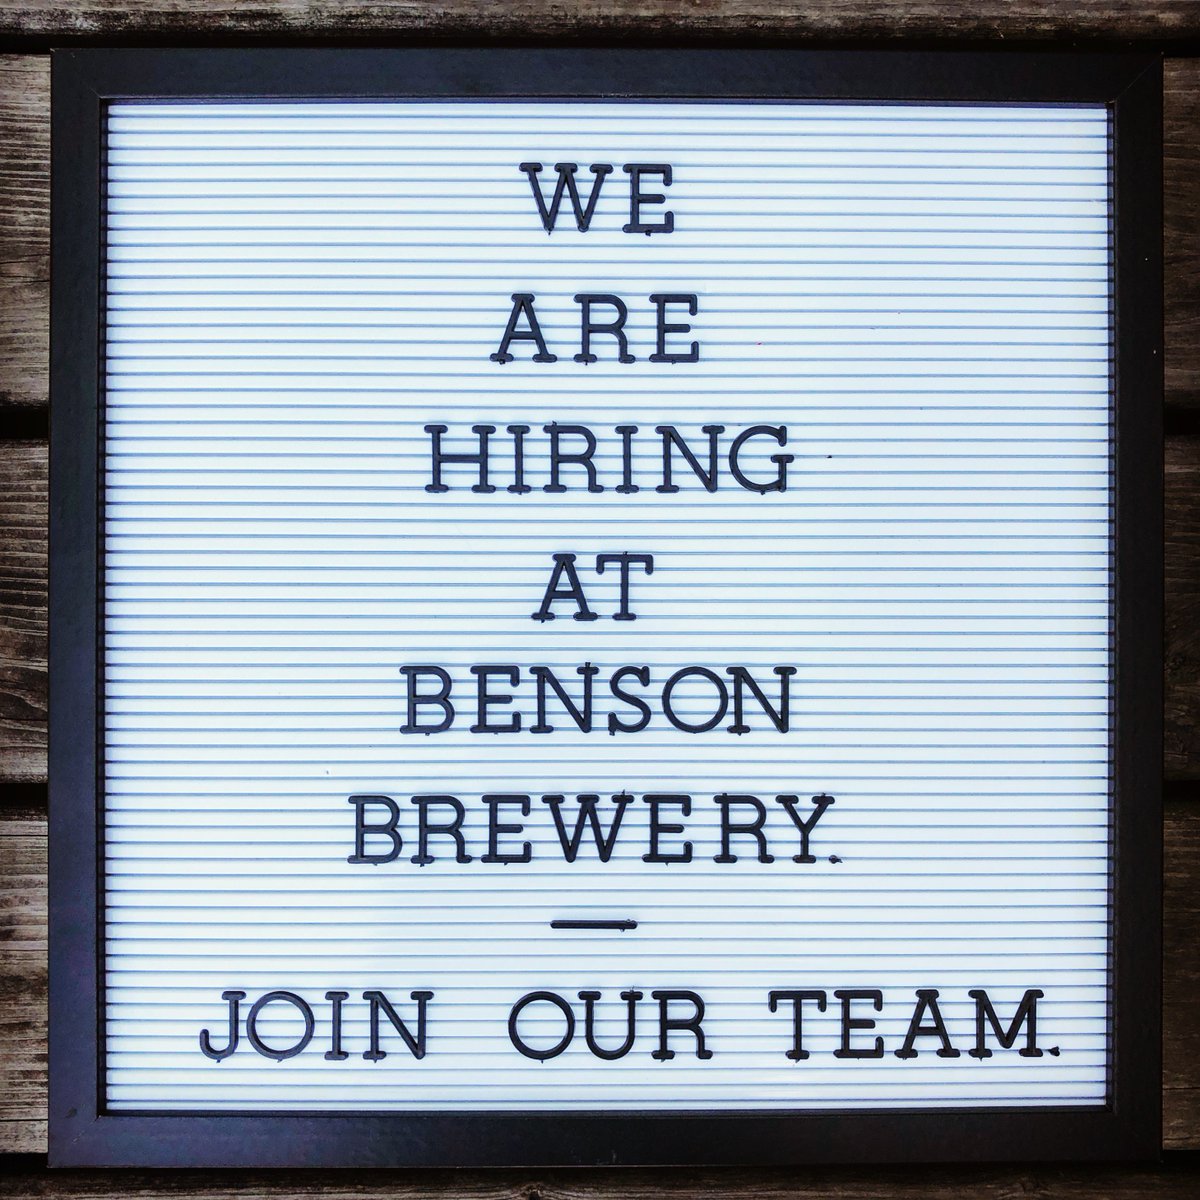 NOW HIRING: Hosts, Bussers and Food Runners! Email resumes to info@bensonbrewery.com or stop on in to fill out an application.